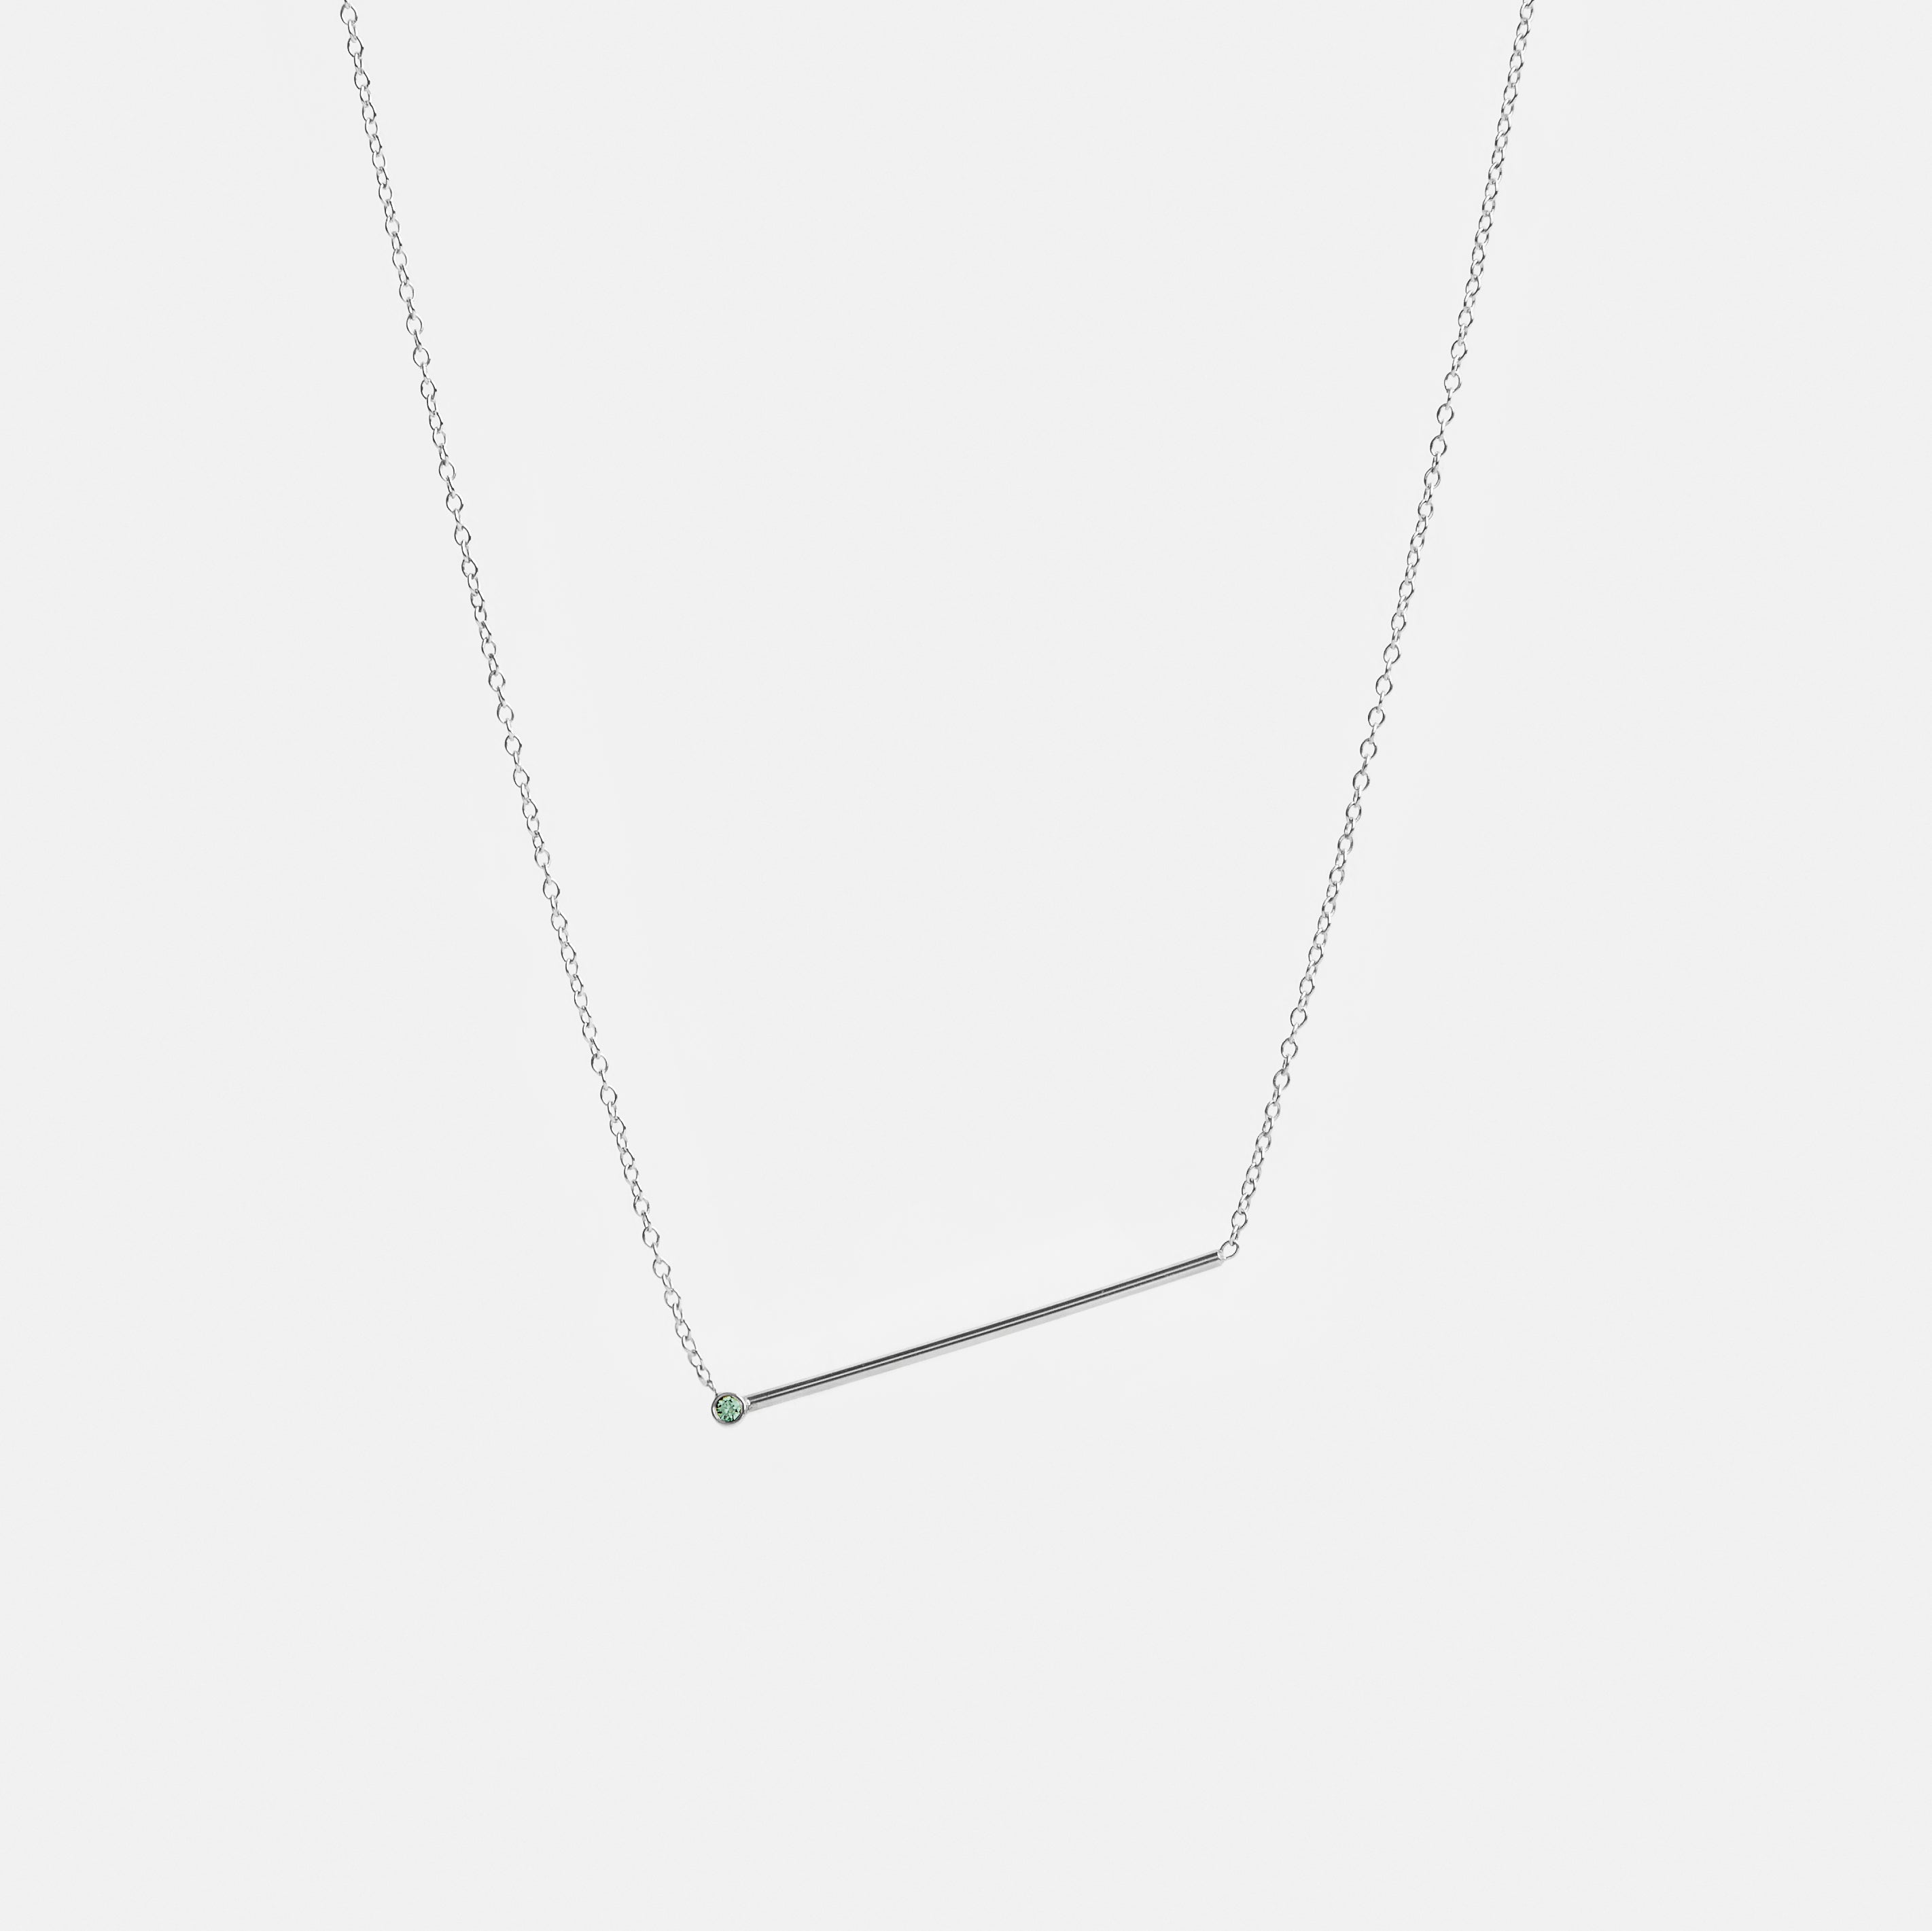 Enne Alternative Necklace in 14k White Gold set with Green Diamond By SHW Fine Jewelry NYC